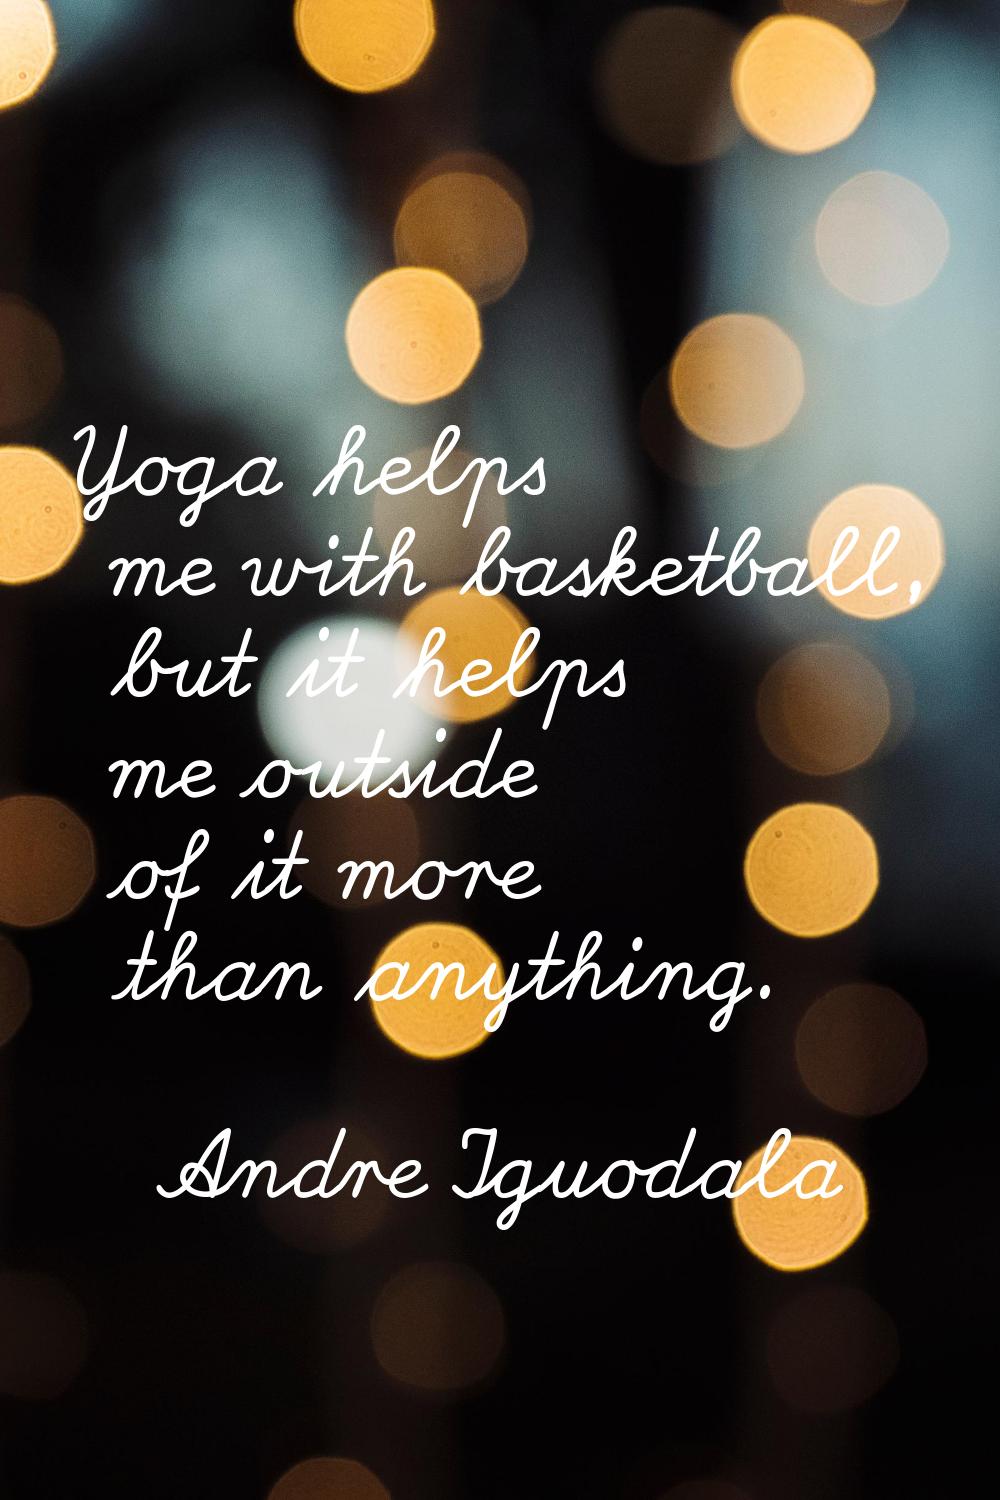 Yoga helps me with basketball, but it helps me outside of it more than anything.